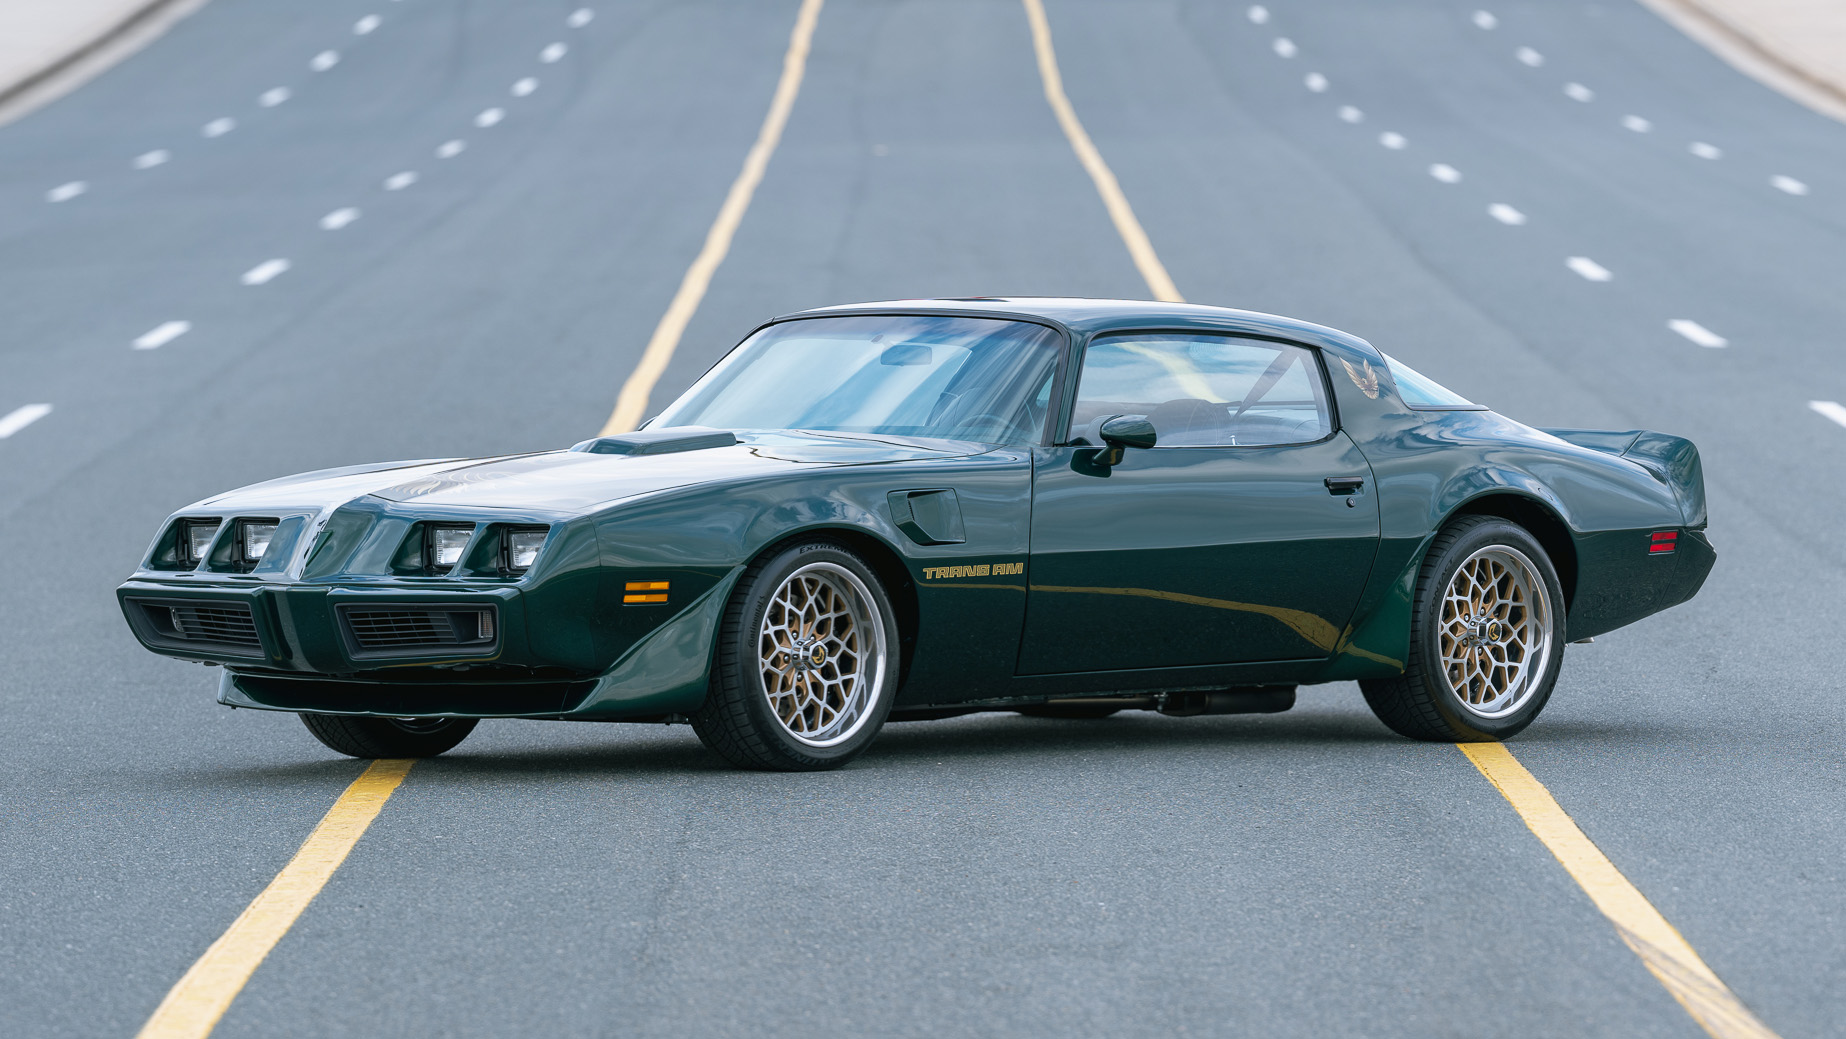 This is a 1979 Pontiac Trans Am Firebird with a new 430bhp V8 | Top Gear